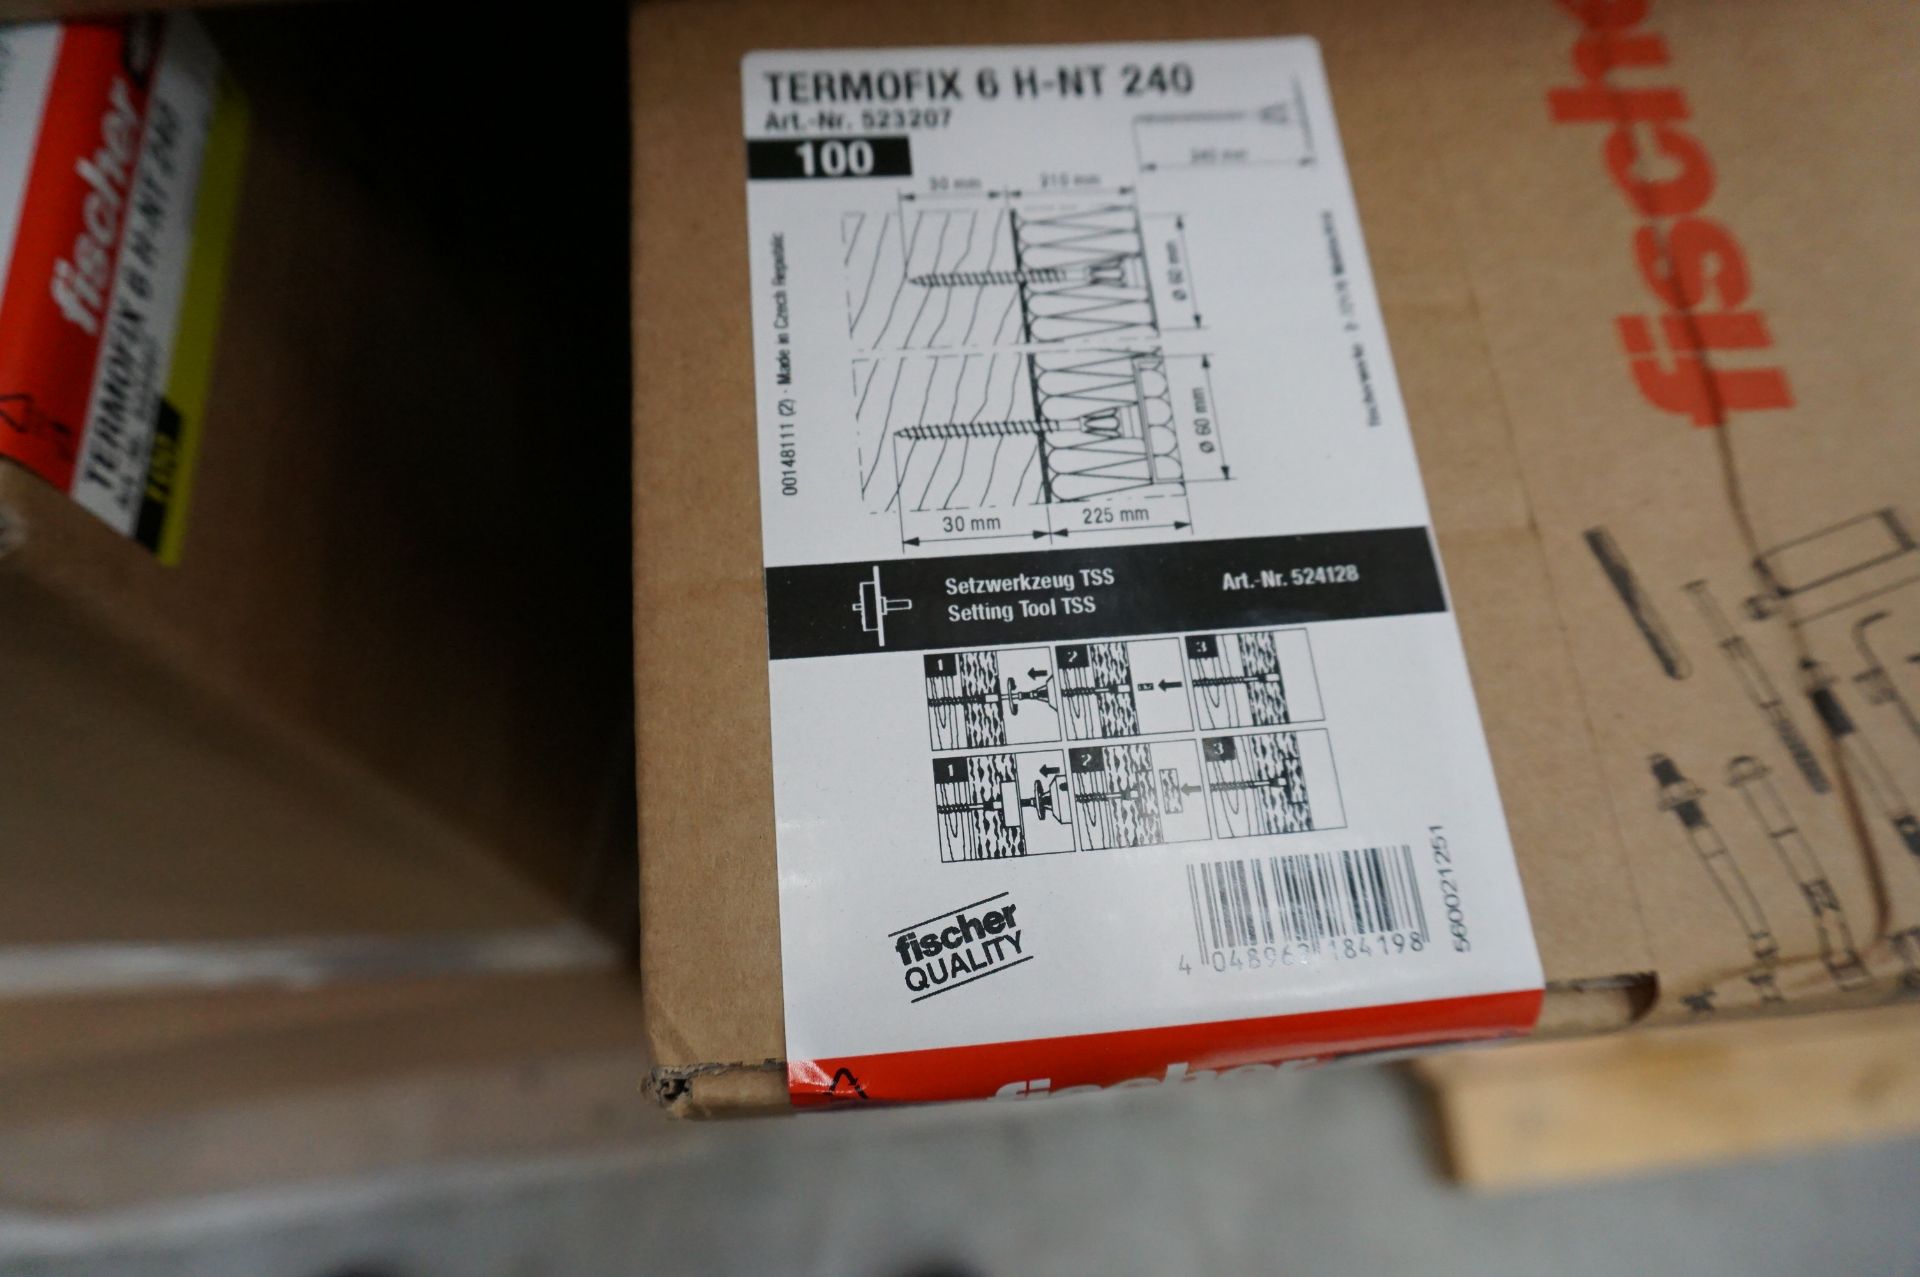 18x (no.) boxes of Fischer Termofix 6-H-NT240 Art Nr 523207 total of 1800 fixings - Image 2 of 4